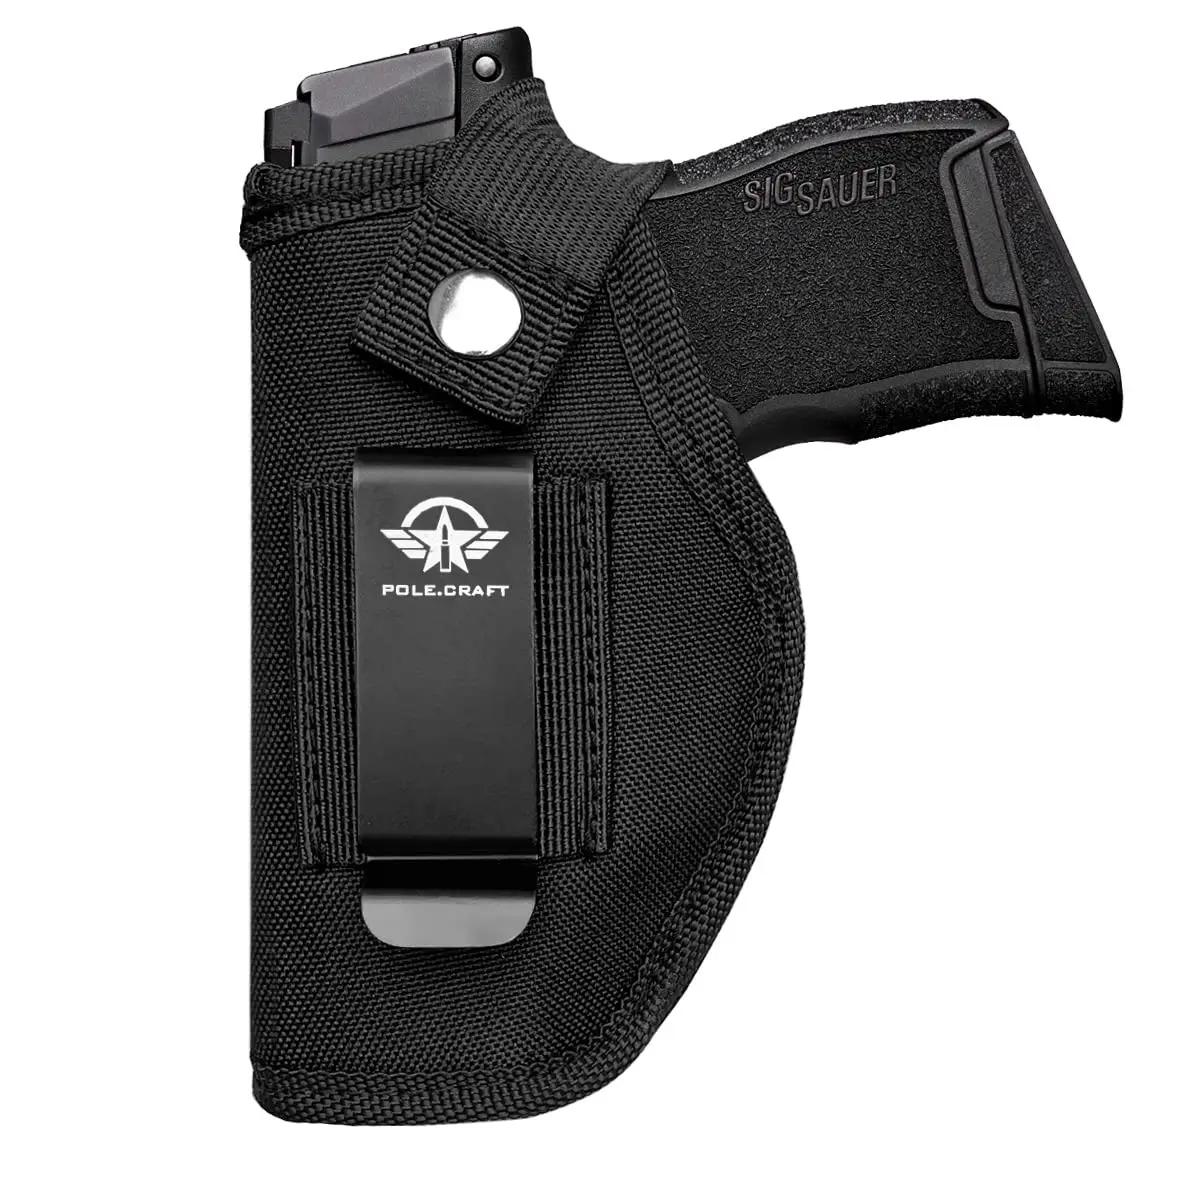  ѿ IWB/OWB  Ȧ: Ruger LCP380 LCP II- Sig Sauer P365 P238 P938 - Walther PPK 380 CCP - S & W   380